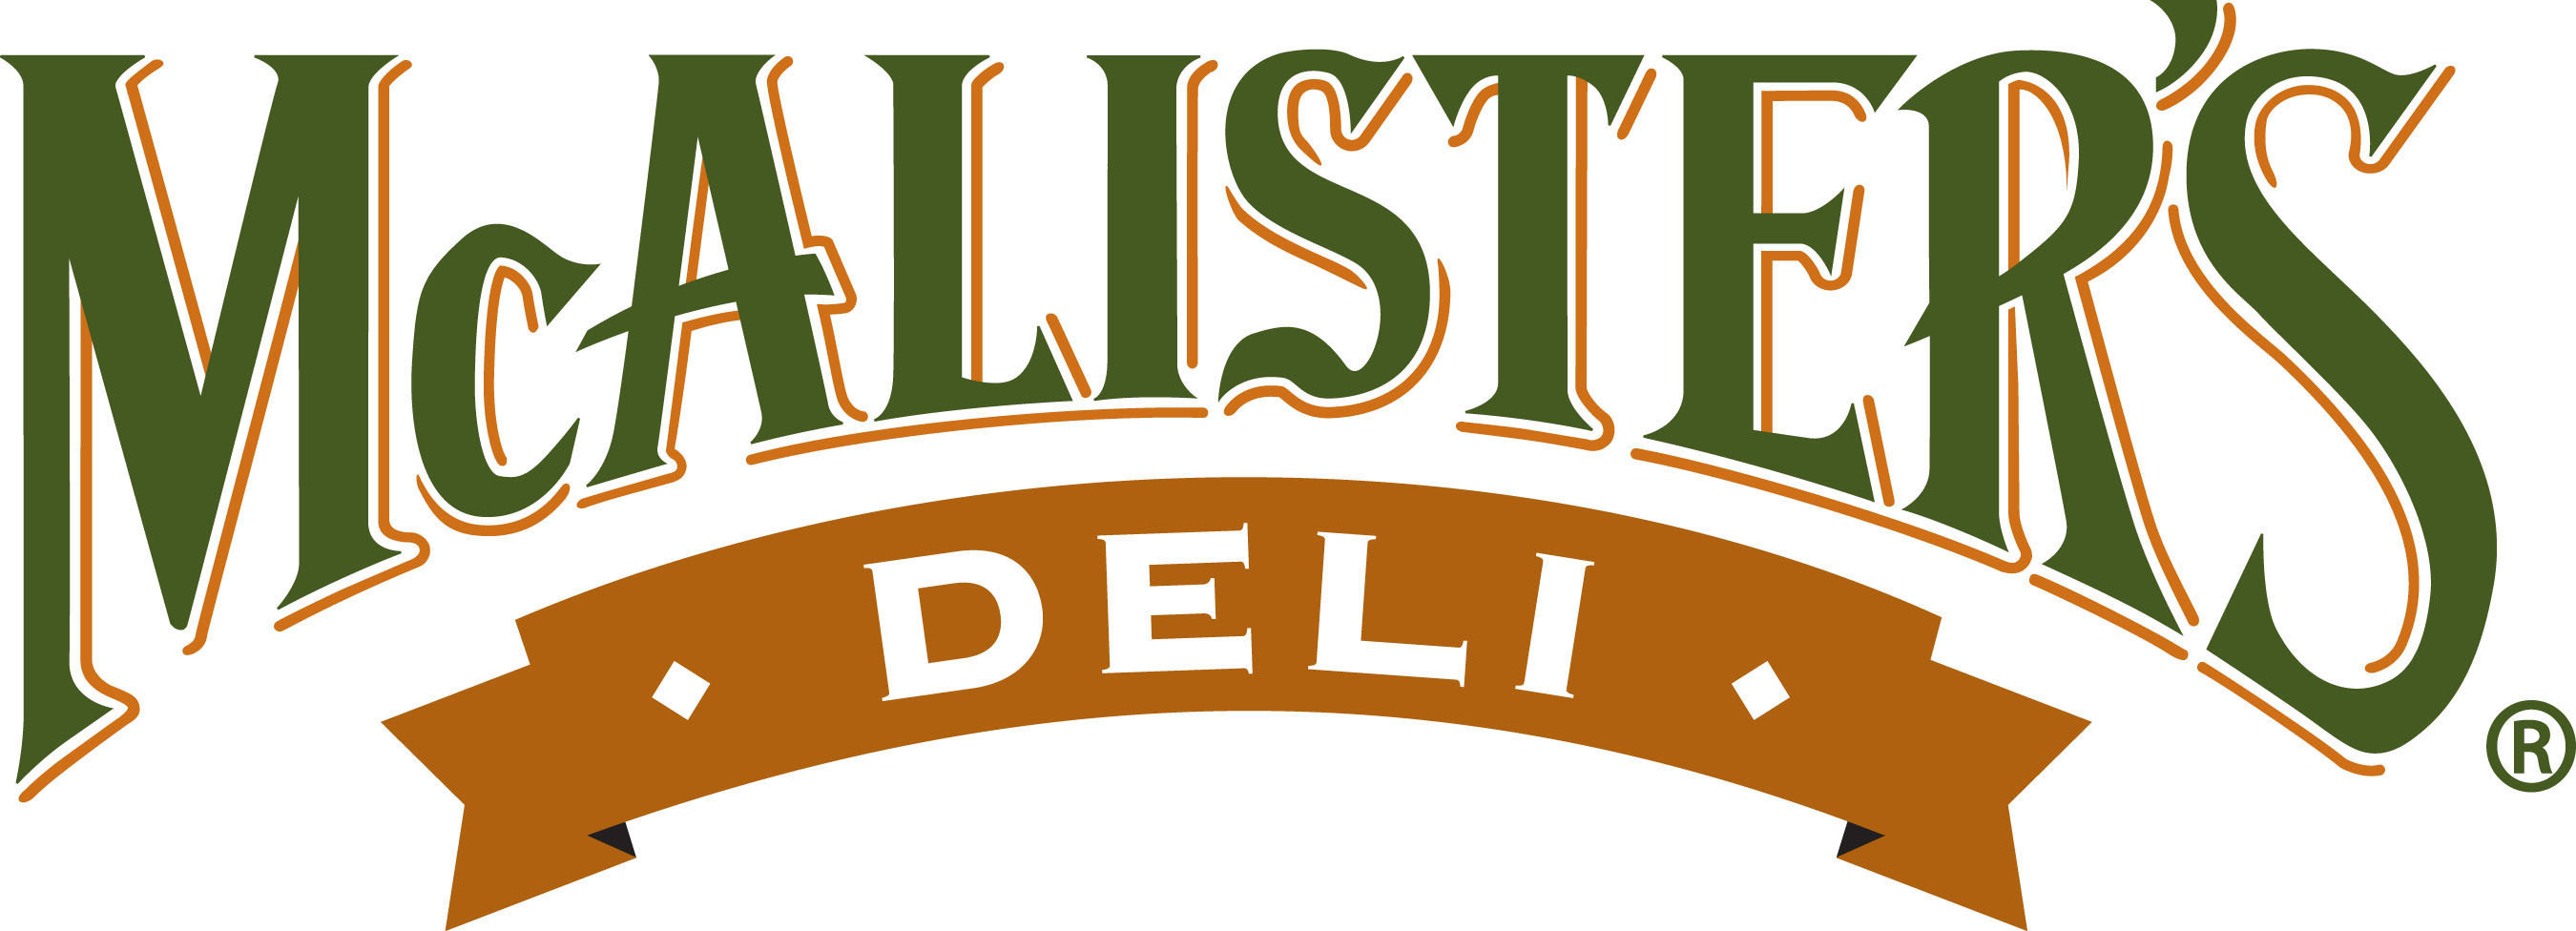 McAlister's Deli Coming To New Jersey Next Year